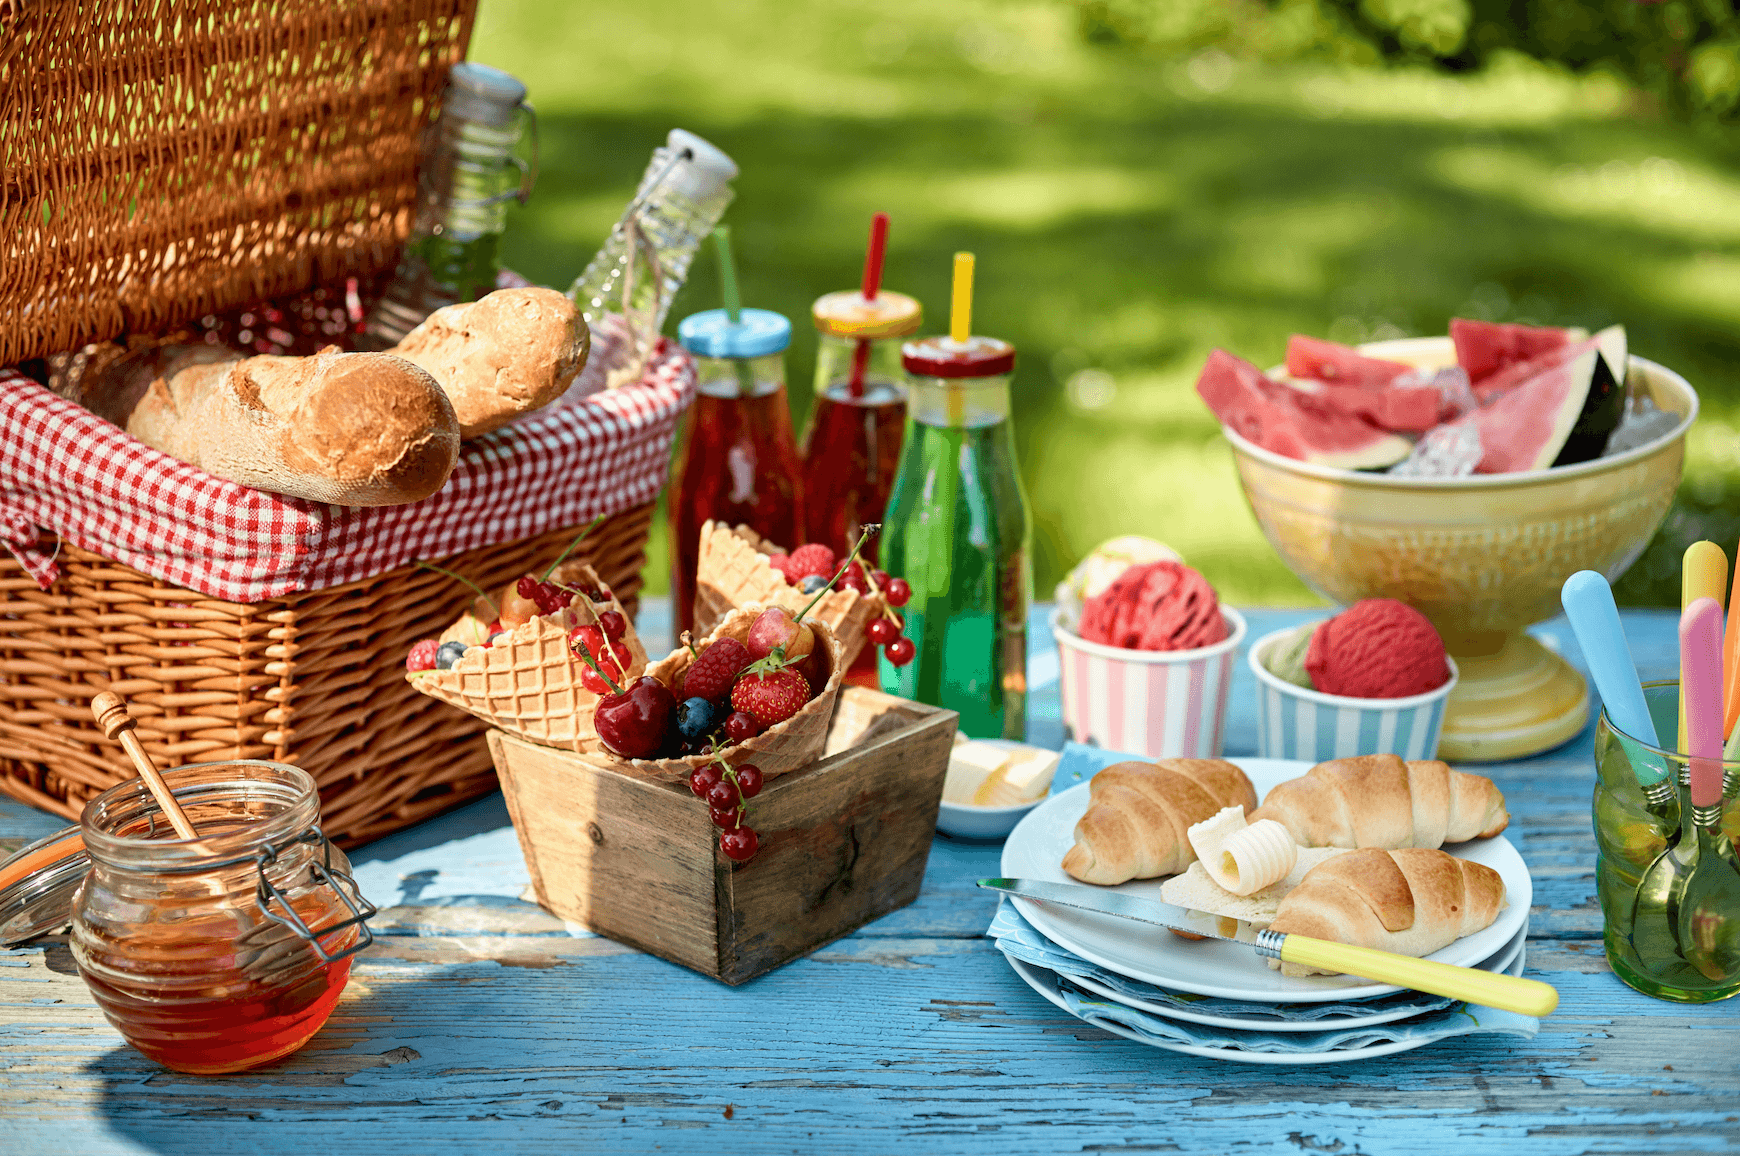 Starting Summer Right with the Perfect Picnic